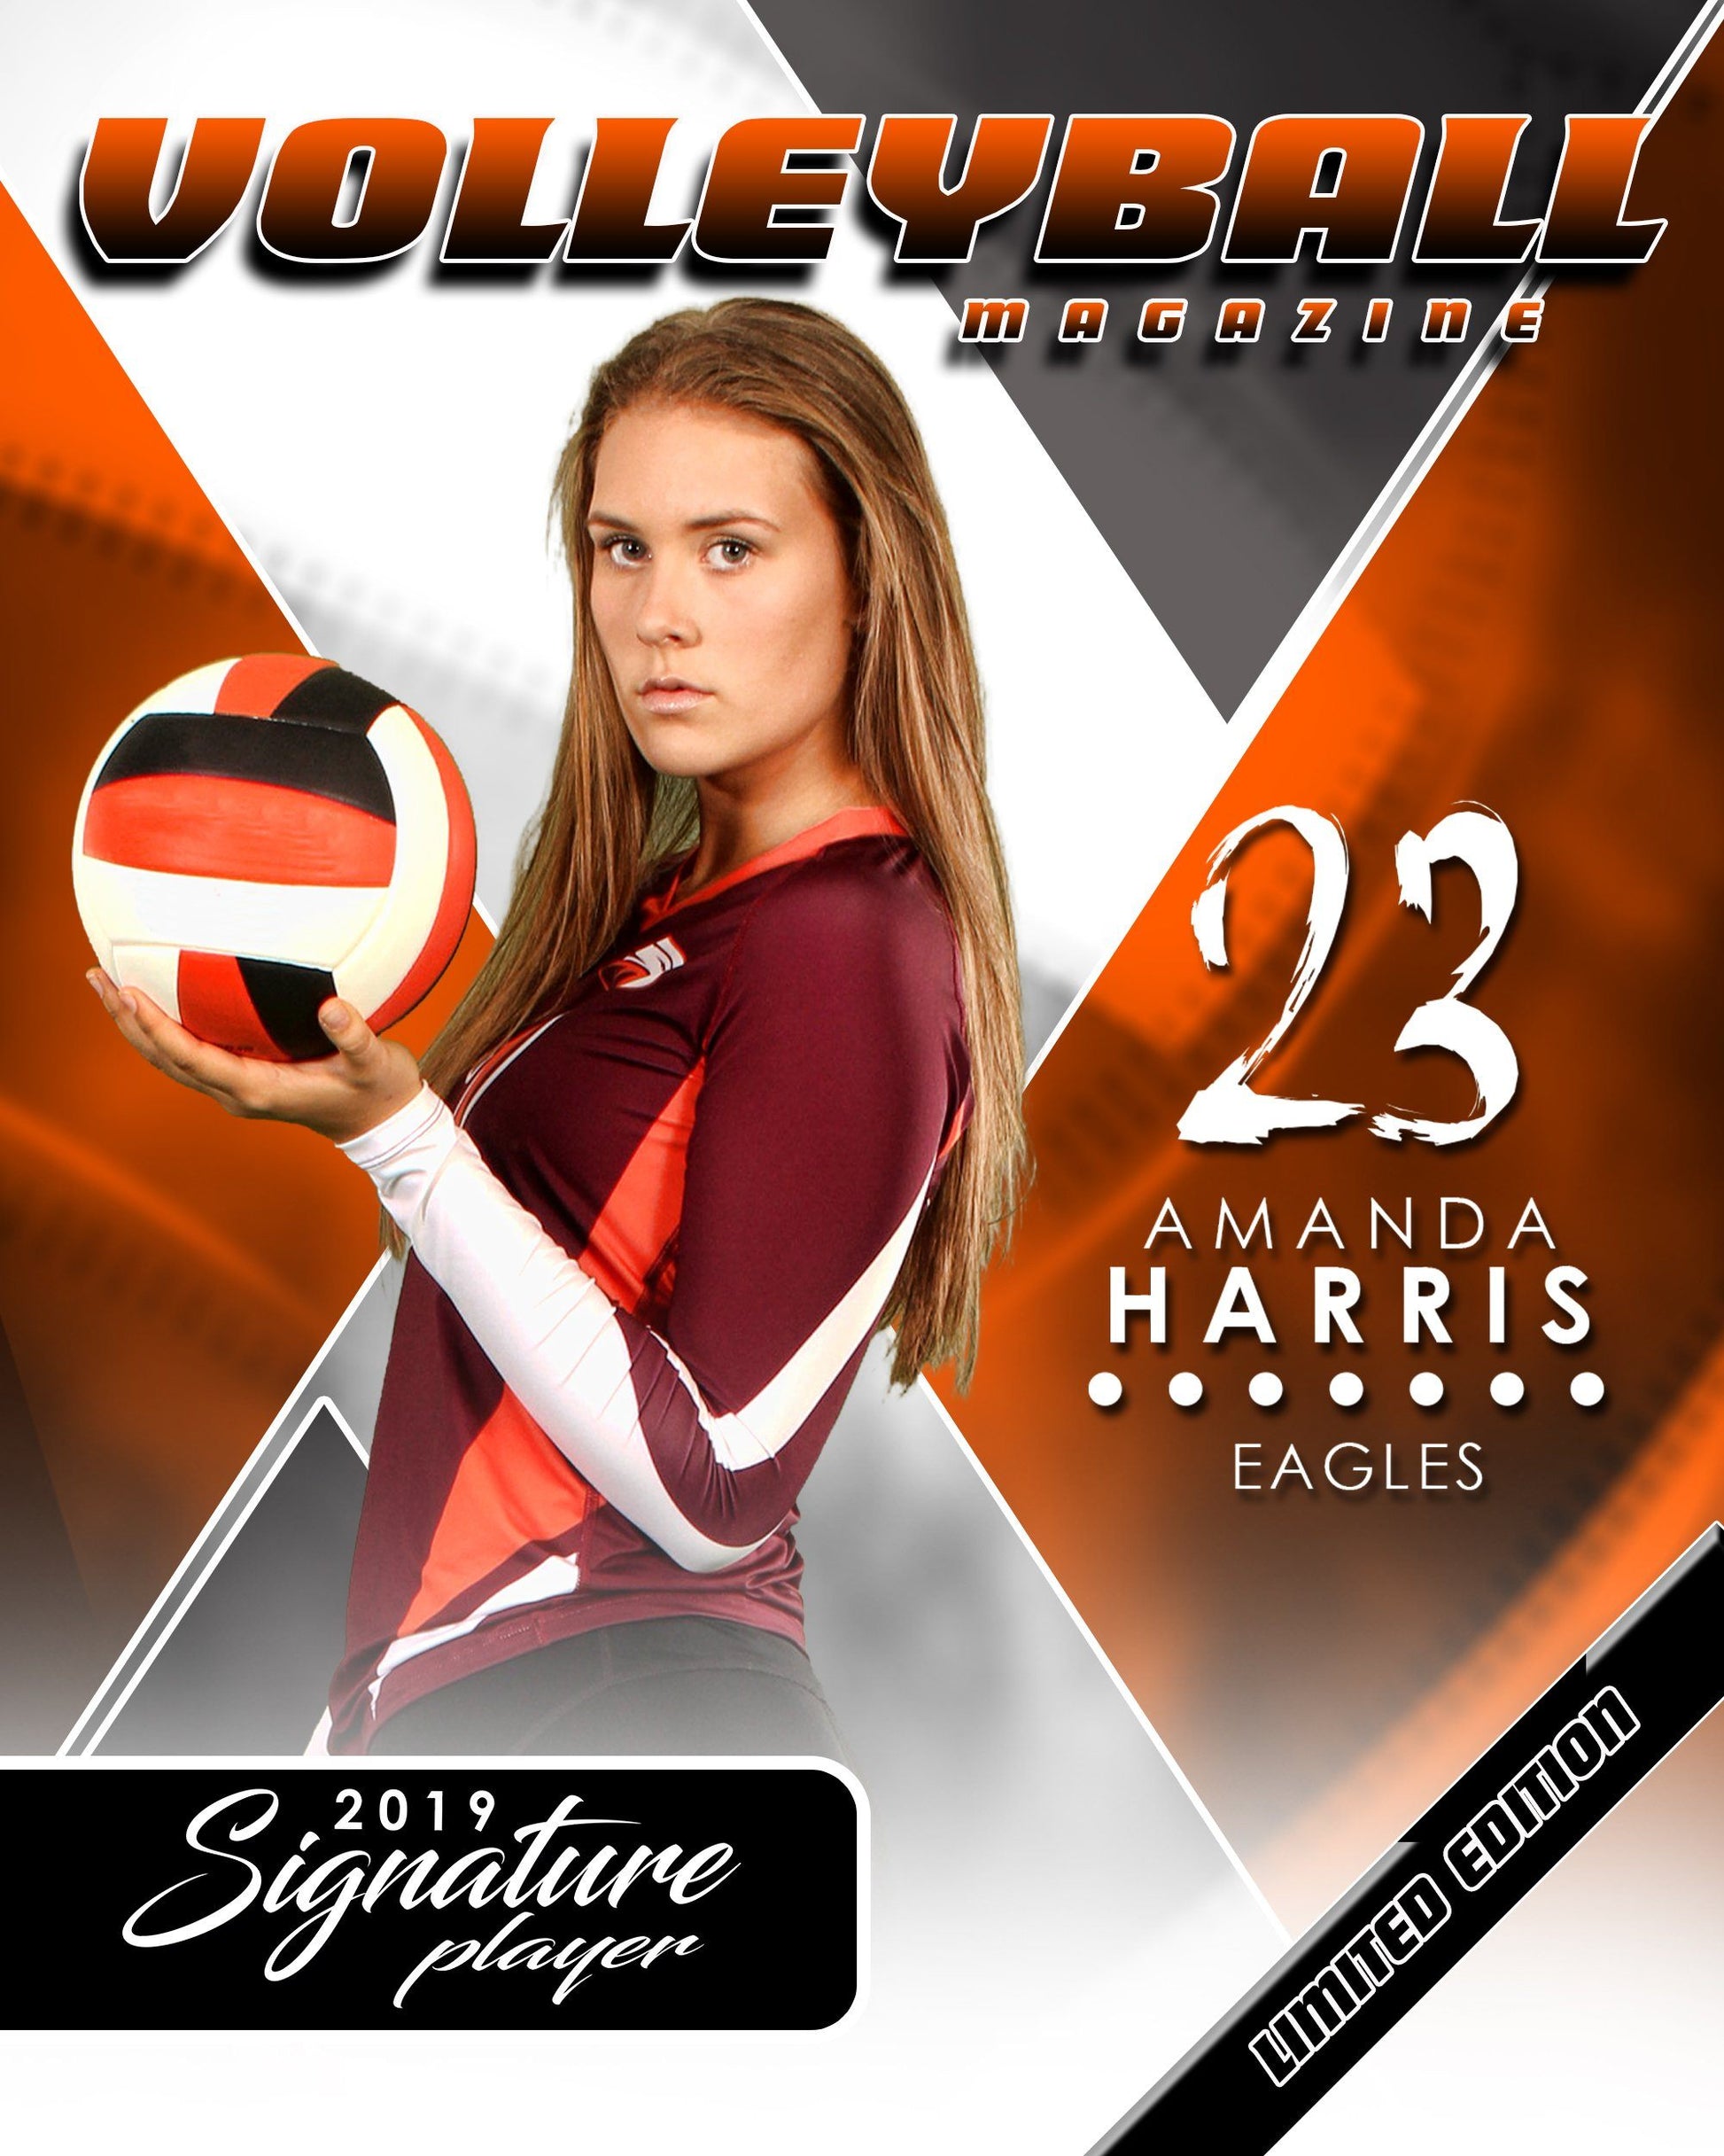 Signature Player - Volleyball - V2 - T&I Extraction Collection-Photoshop Template - Photo Solutions